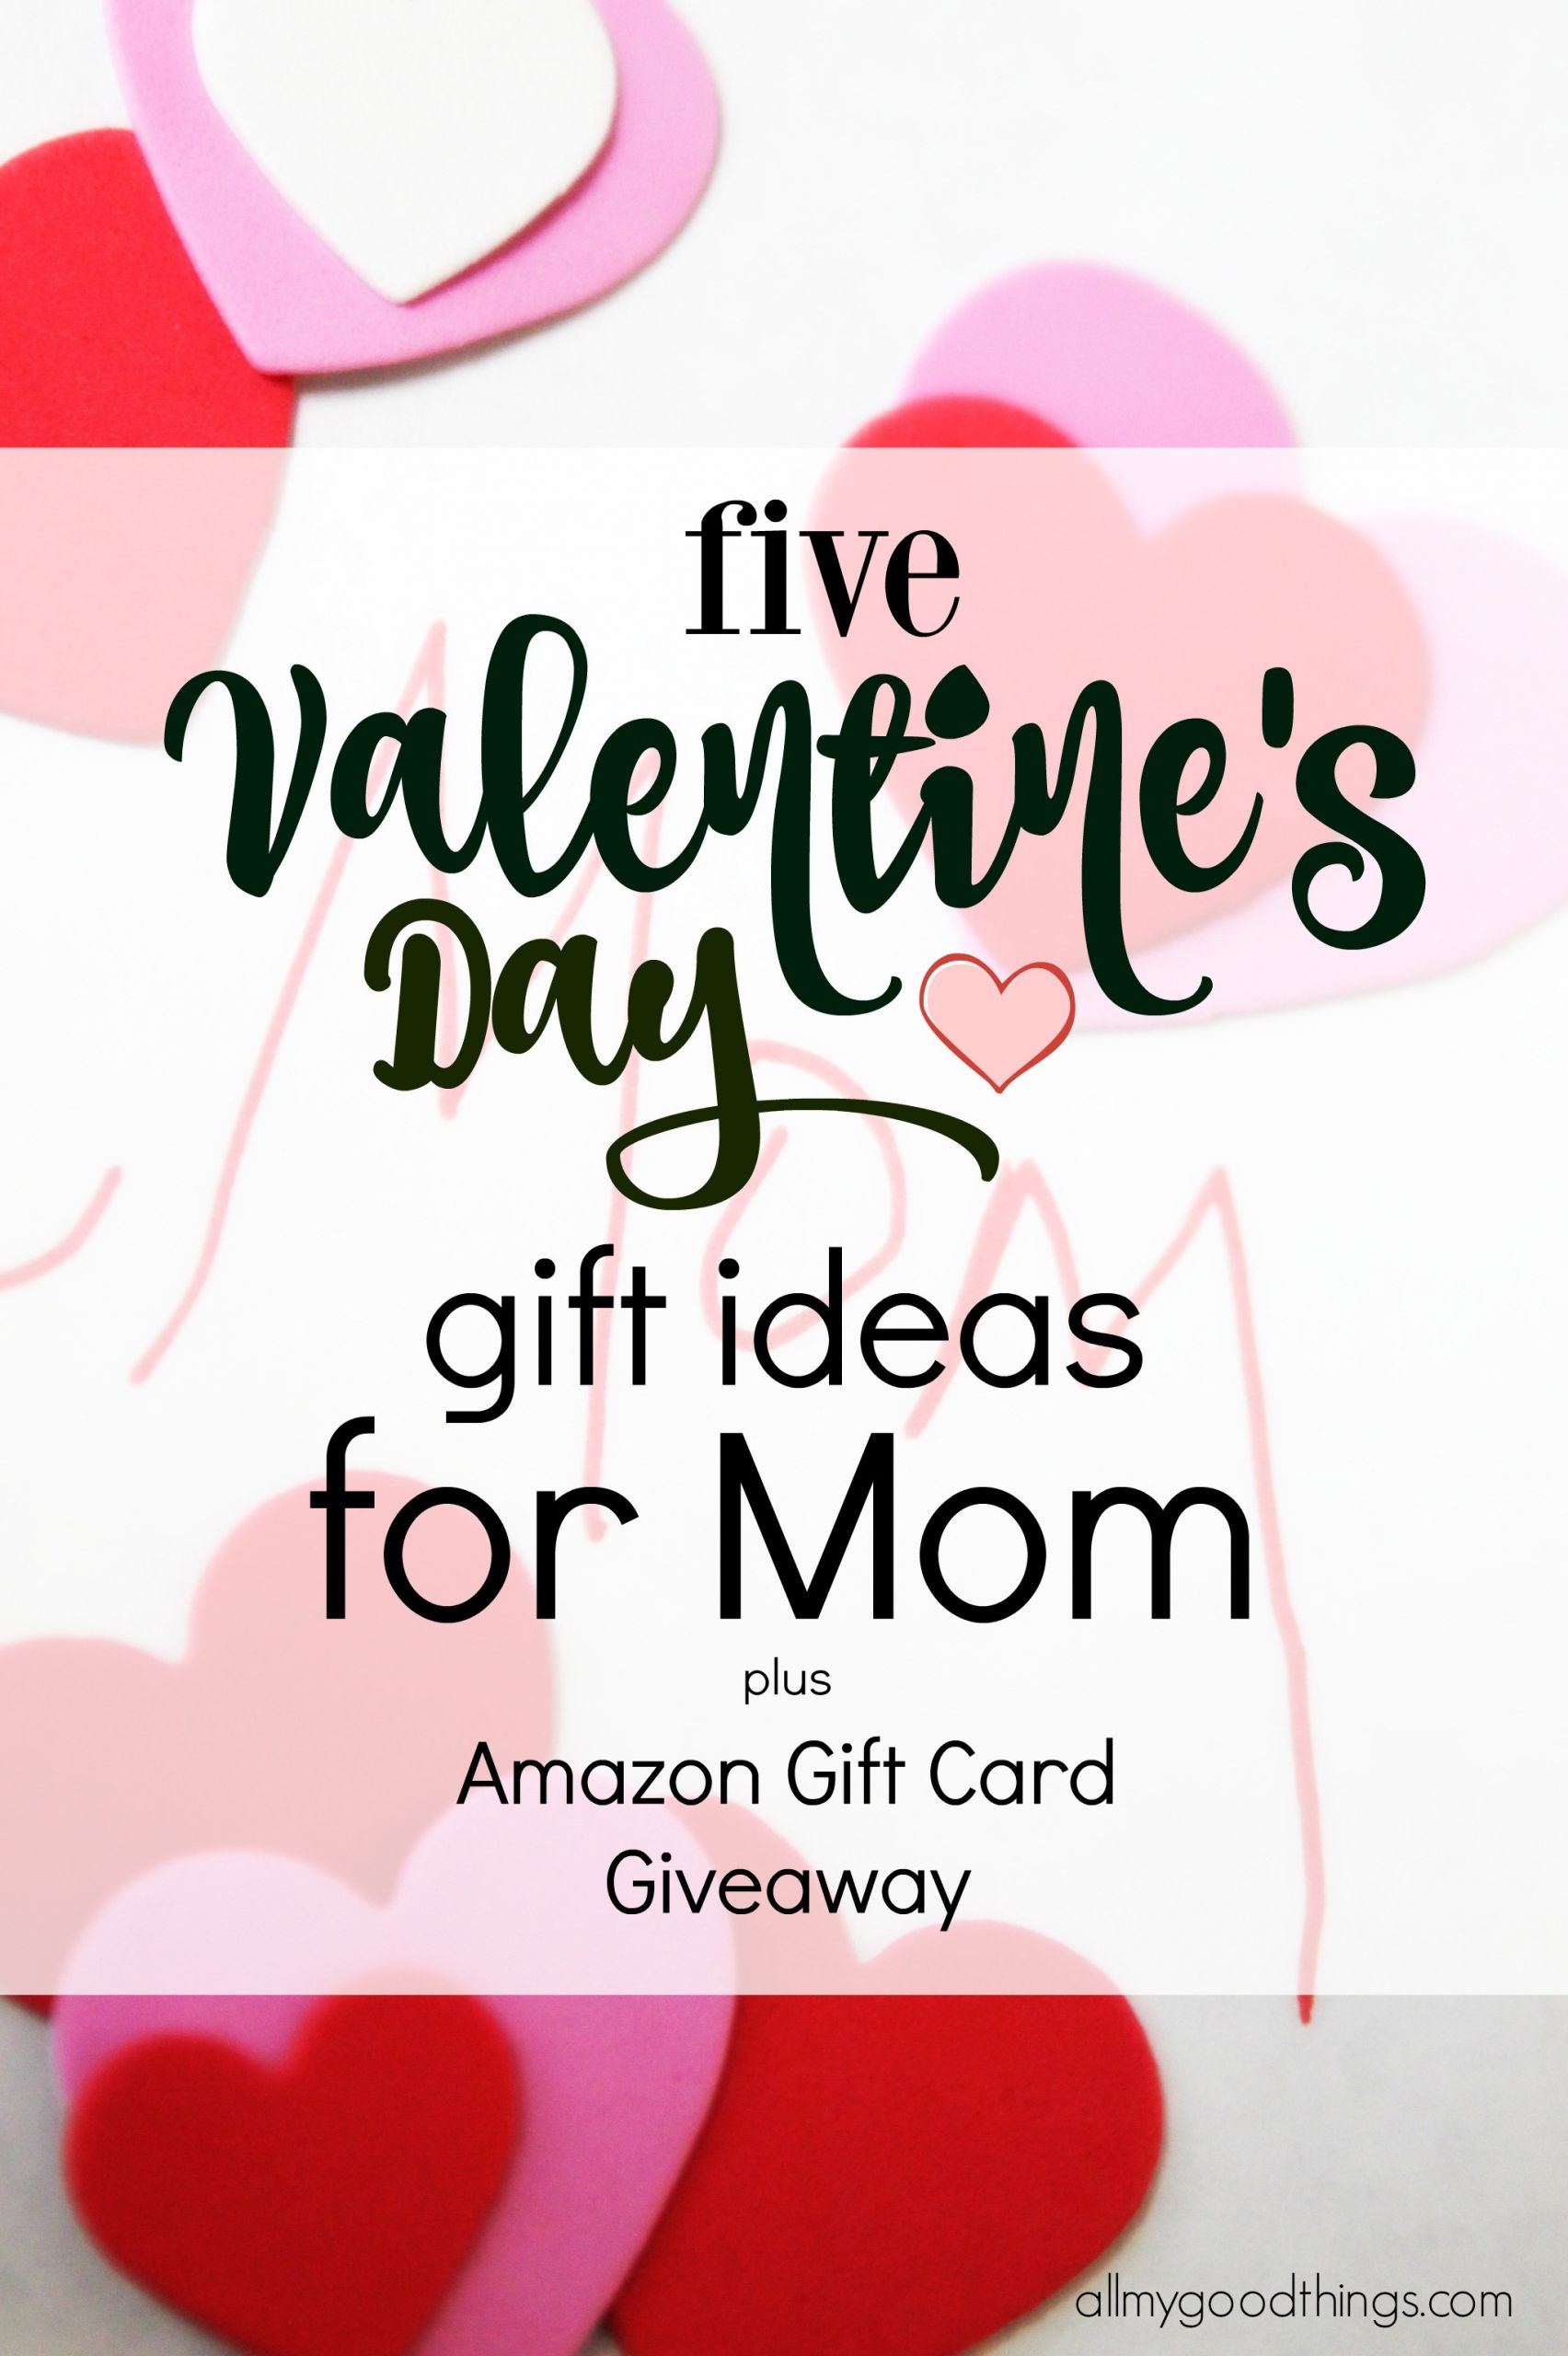 Valentines Gift Ideas For Mom
 Five Valentine s Day Gift Ideas for Mom and Amazon Gift